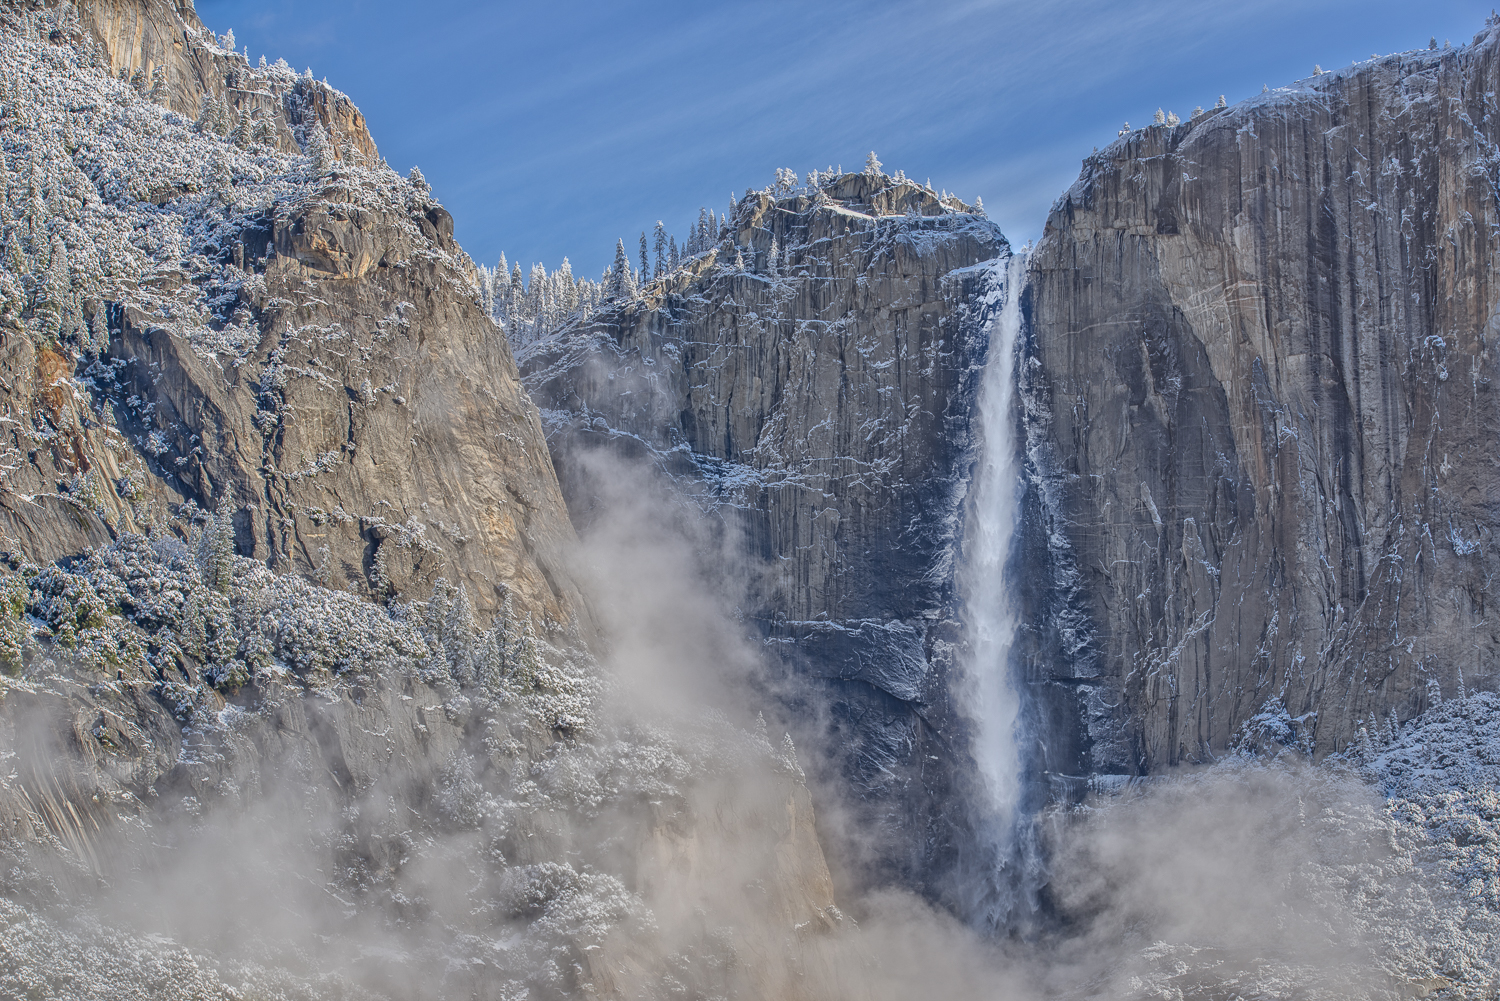 The iconic Upper Yosemite Falls with early morning light